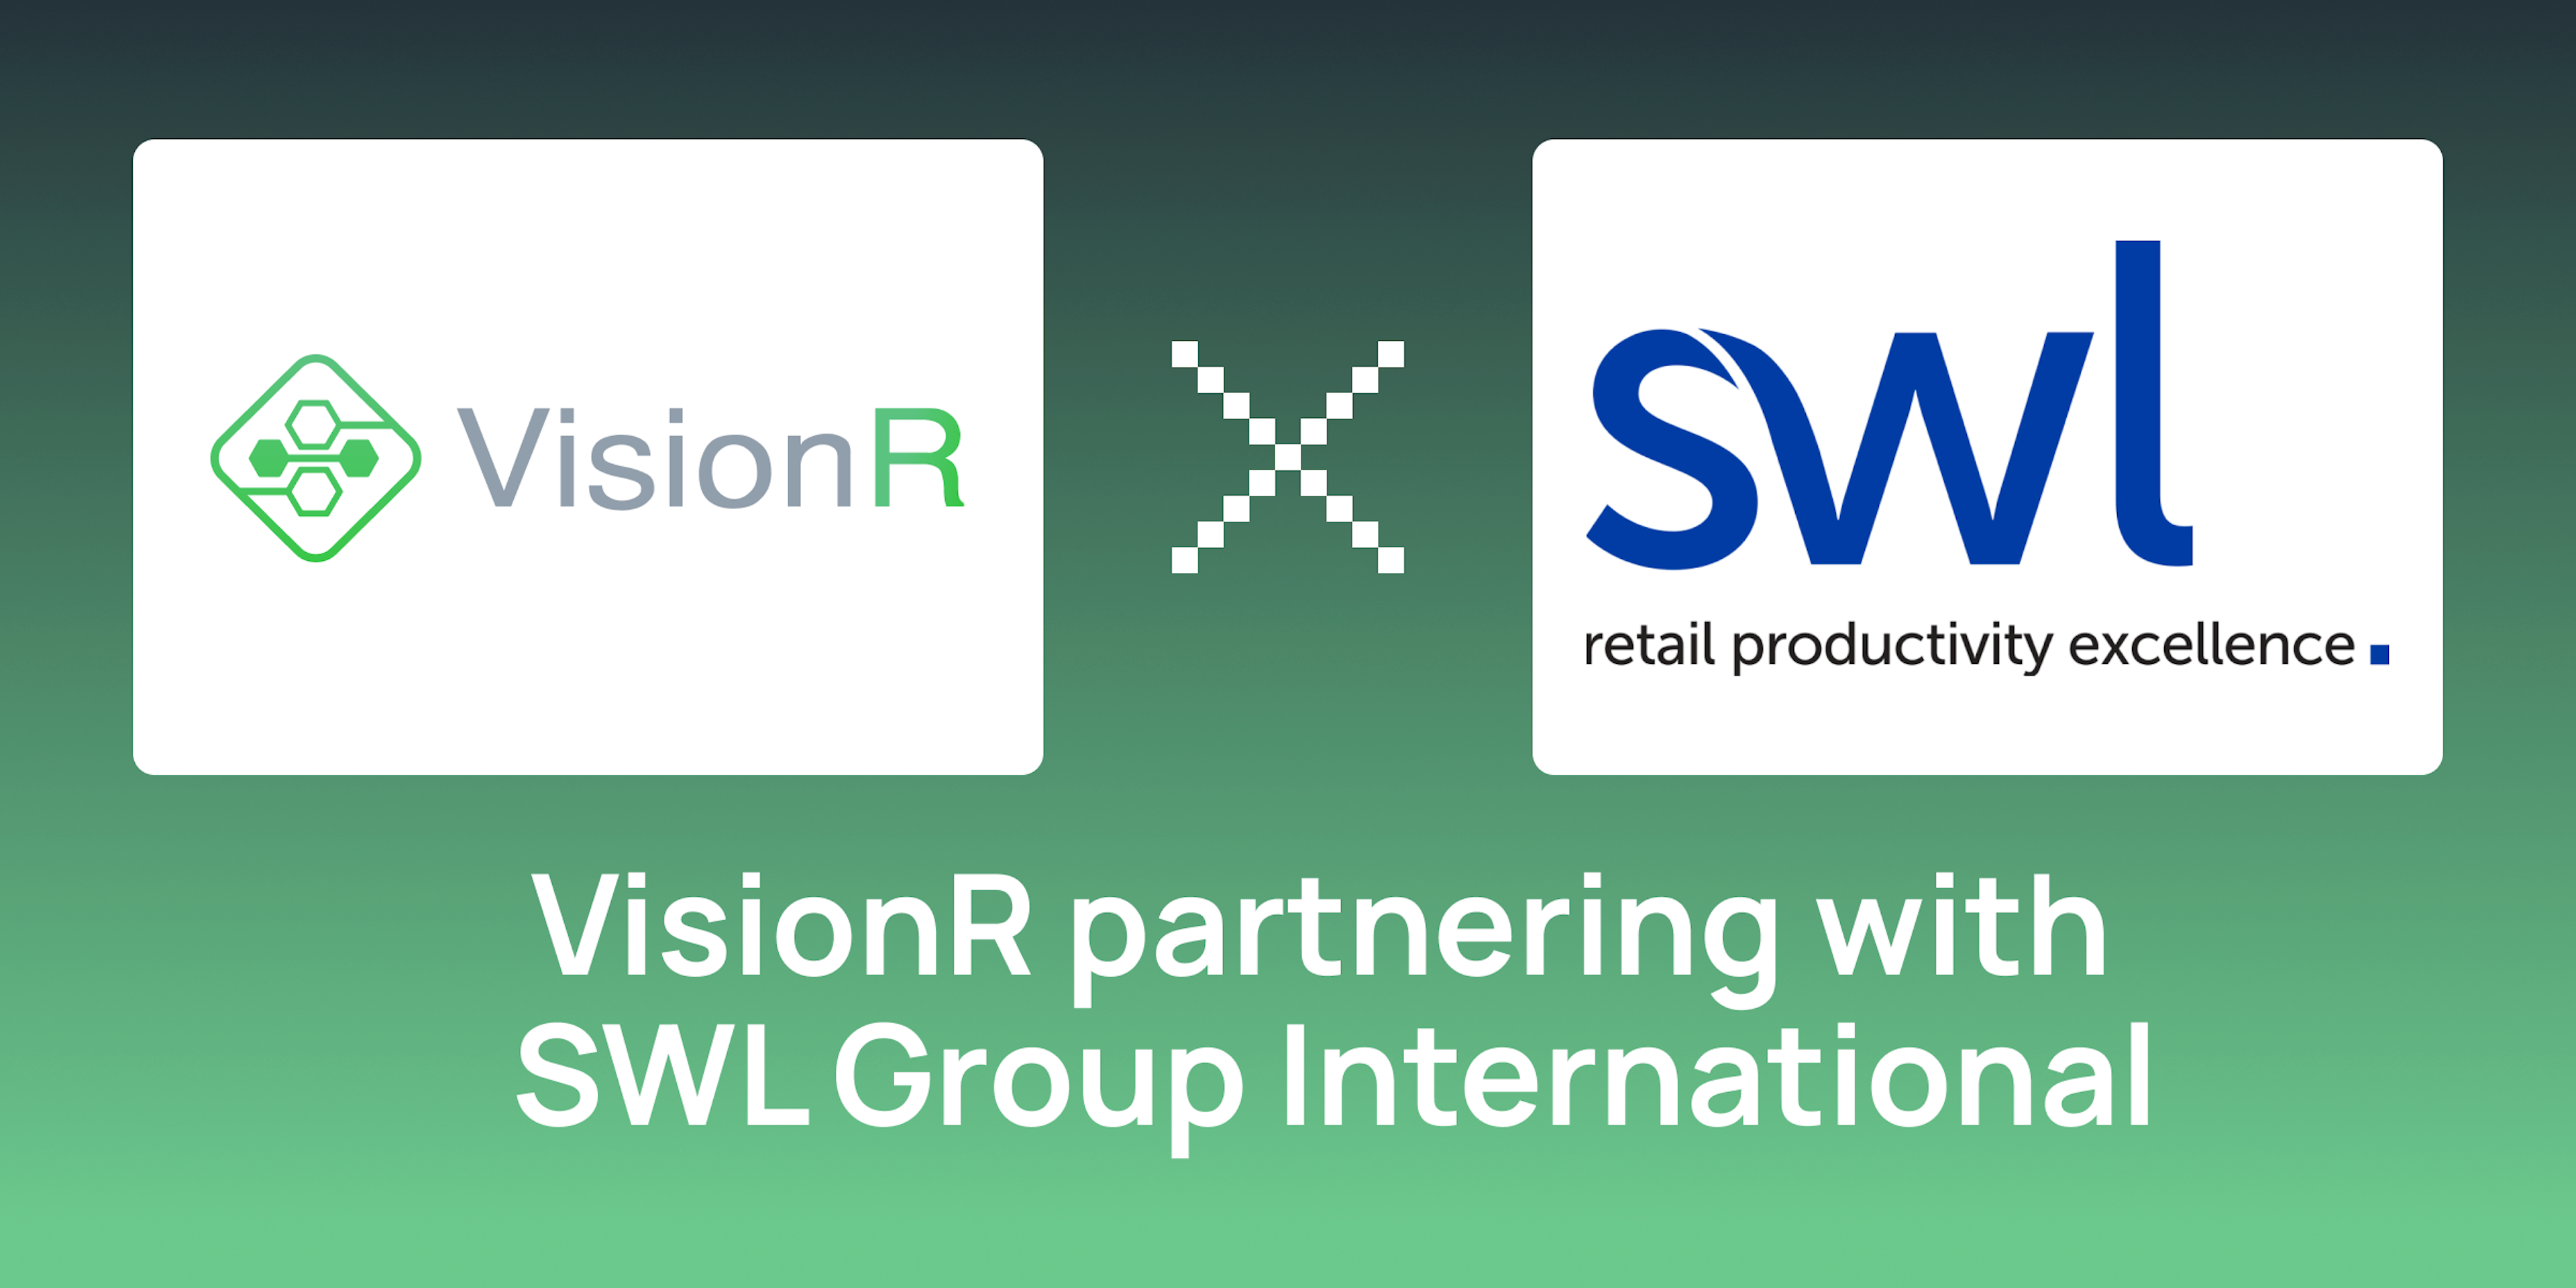 VisionR partnering with SWL Group International